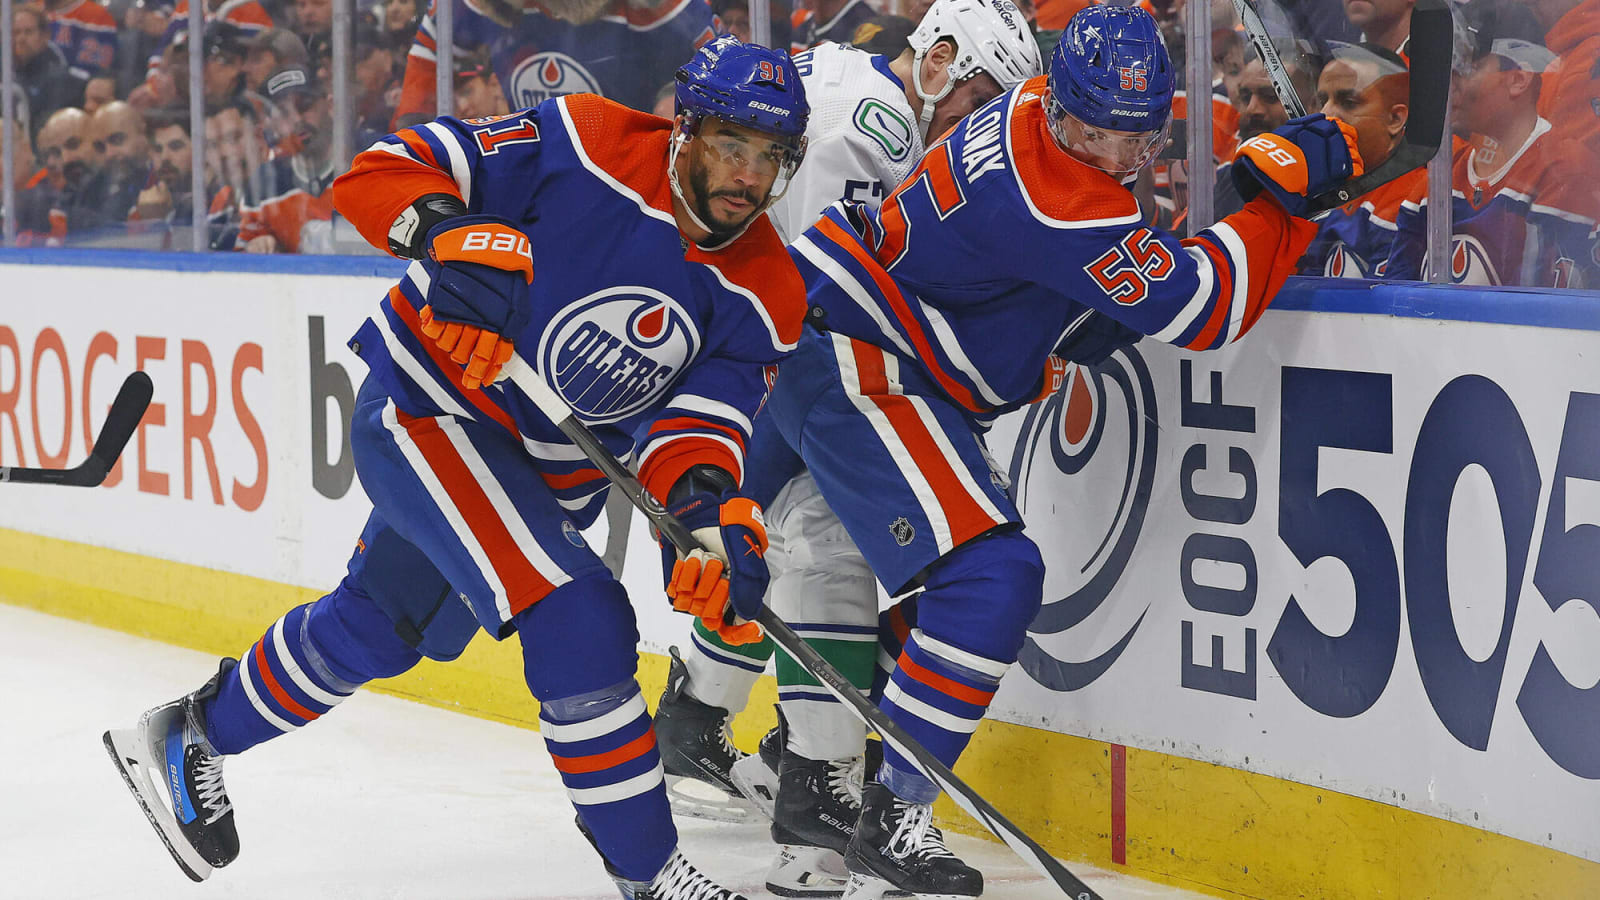 Beyond the Boxscore: Team effort leads to victory for Oilers